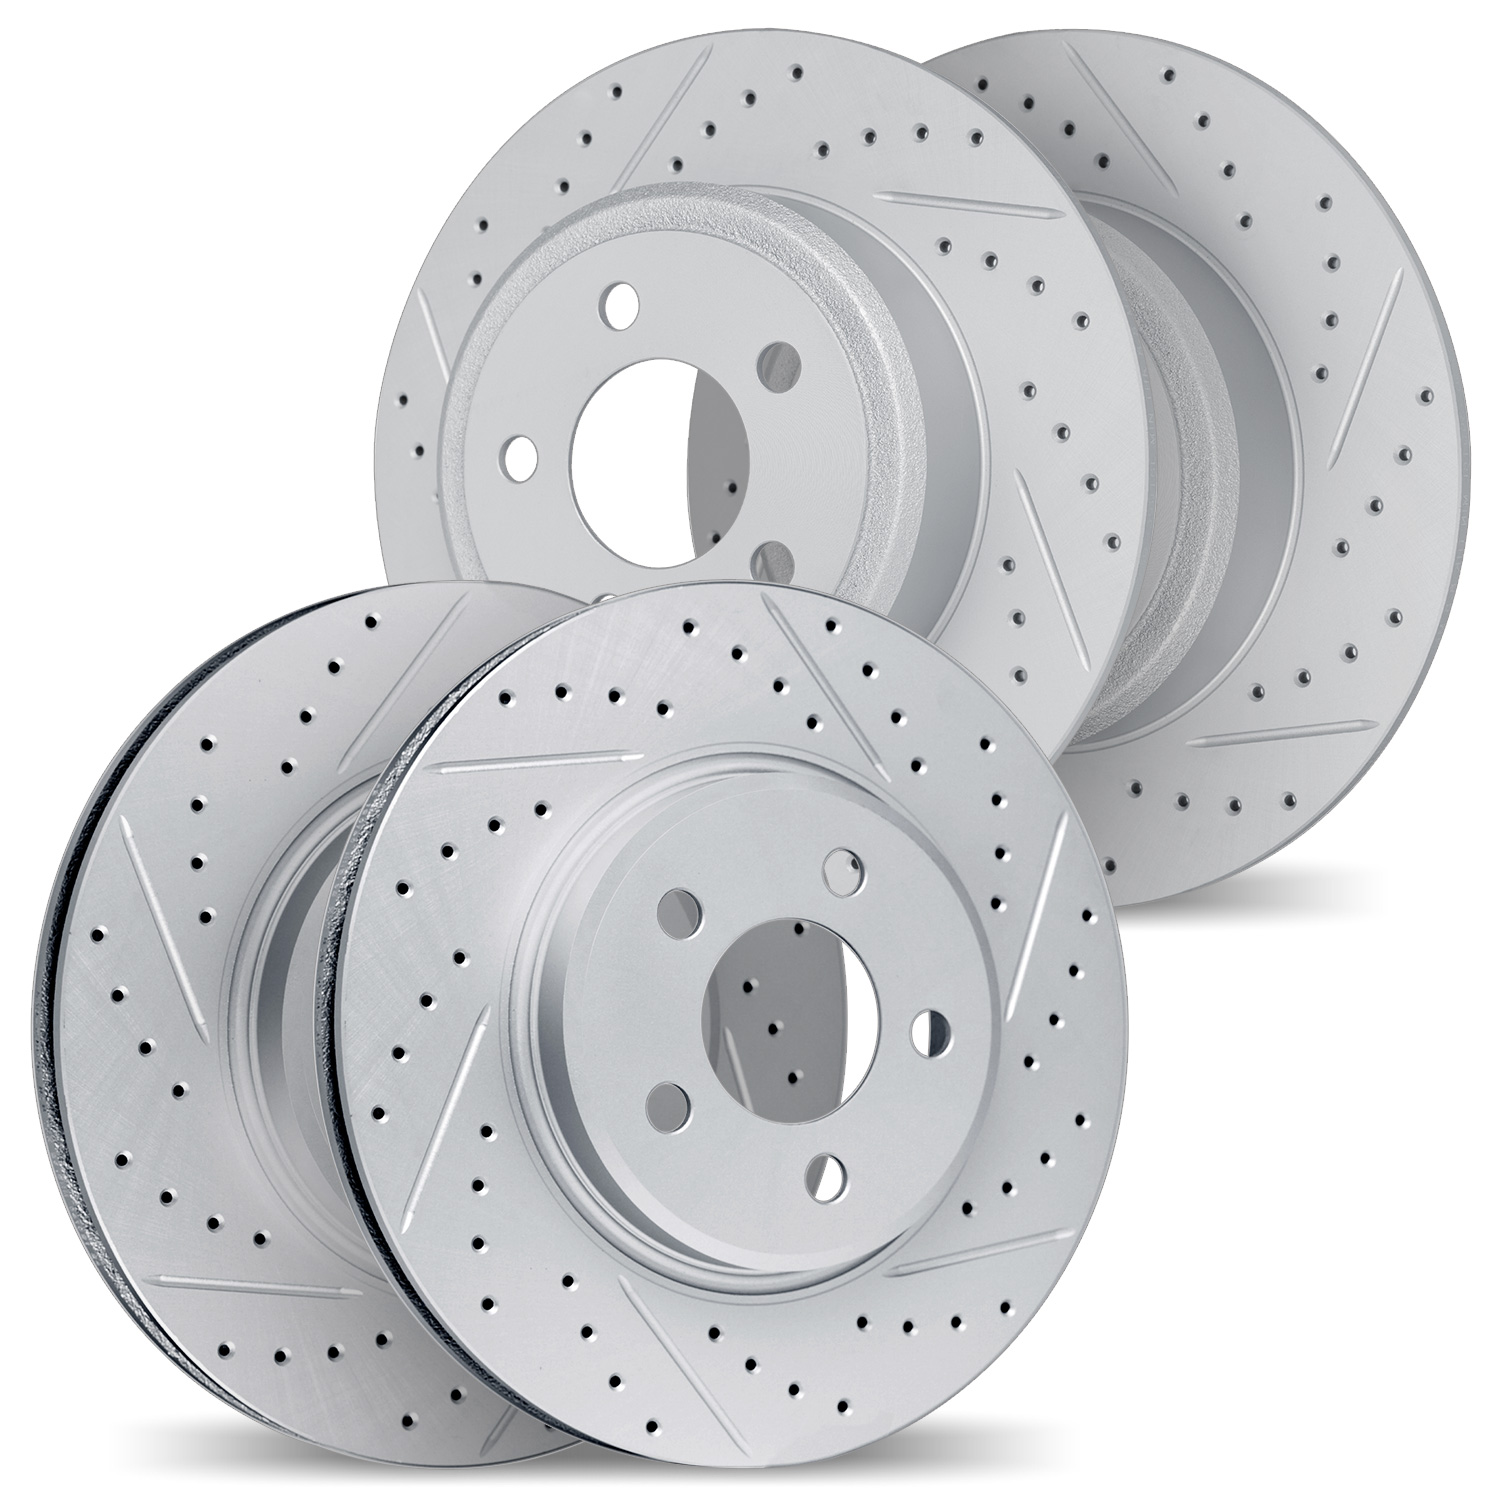 2004-03032 Geoperformance Drilled/Slotted Brake Rotors, Fits Select Kia/Hyundai/Genesis, Position: Front and Rear